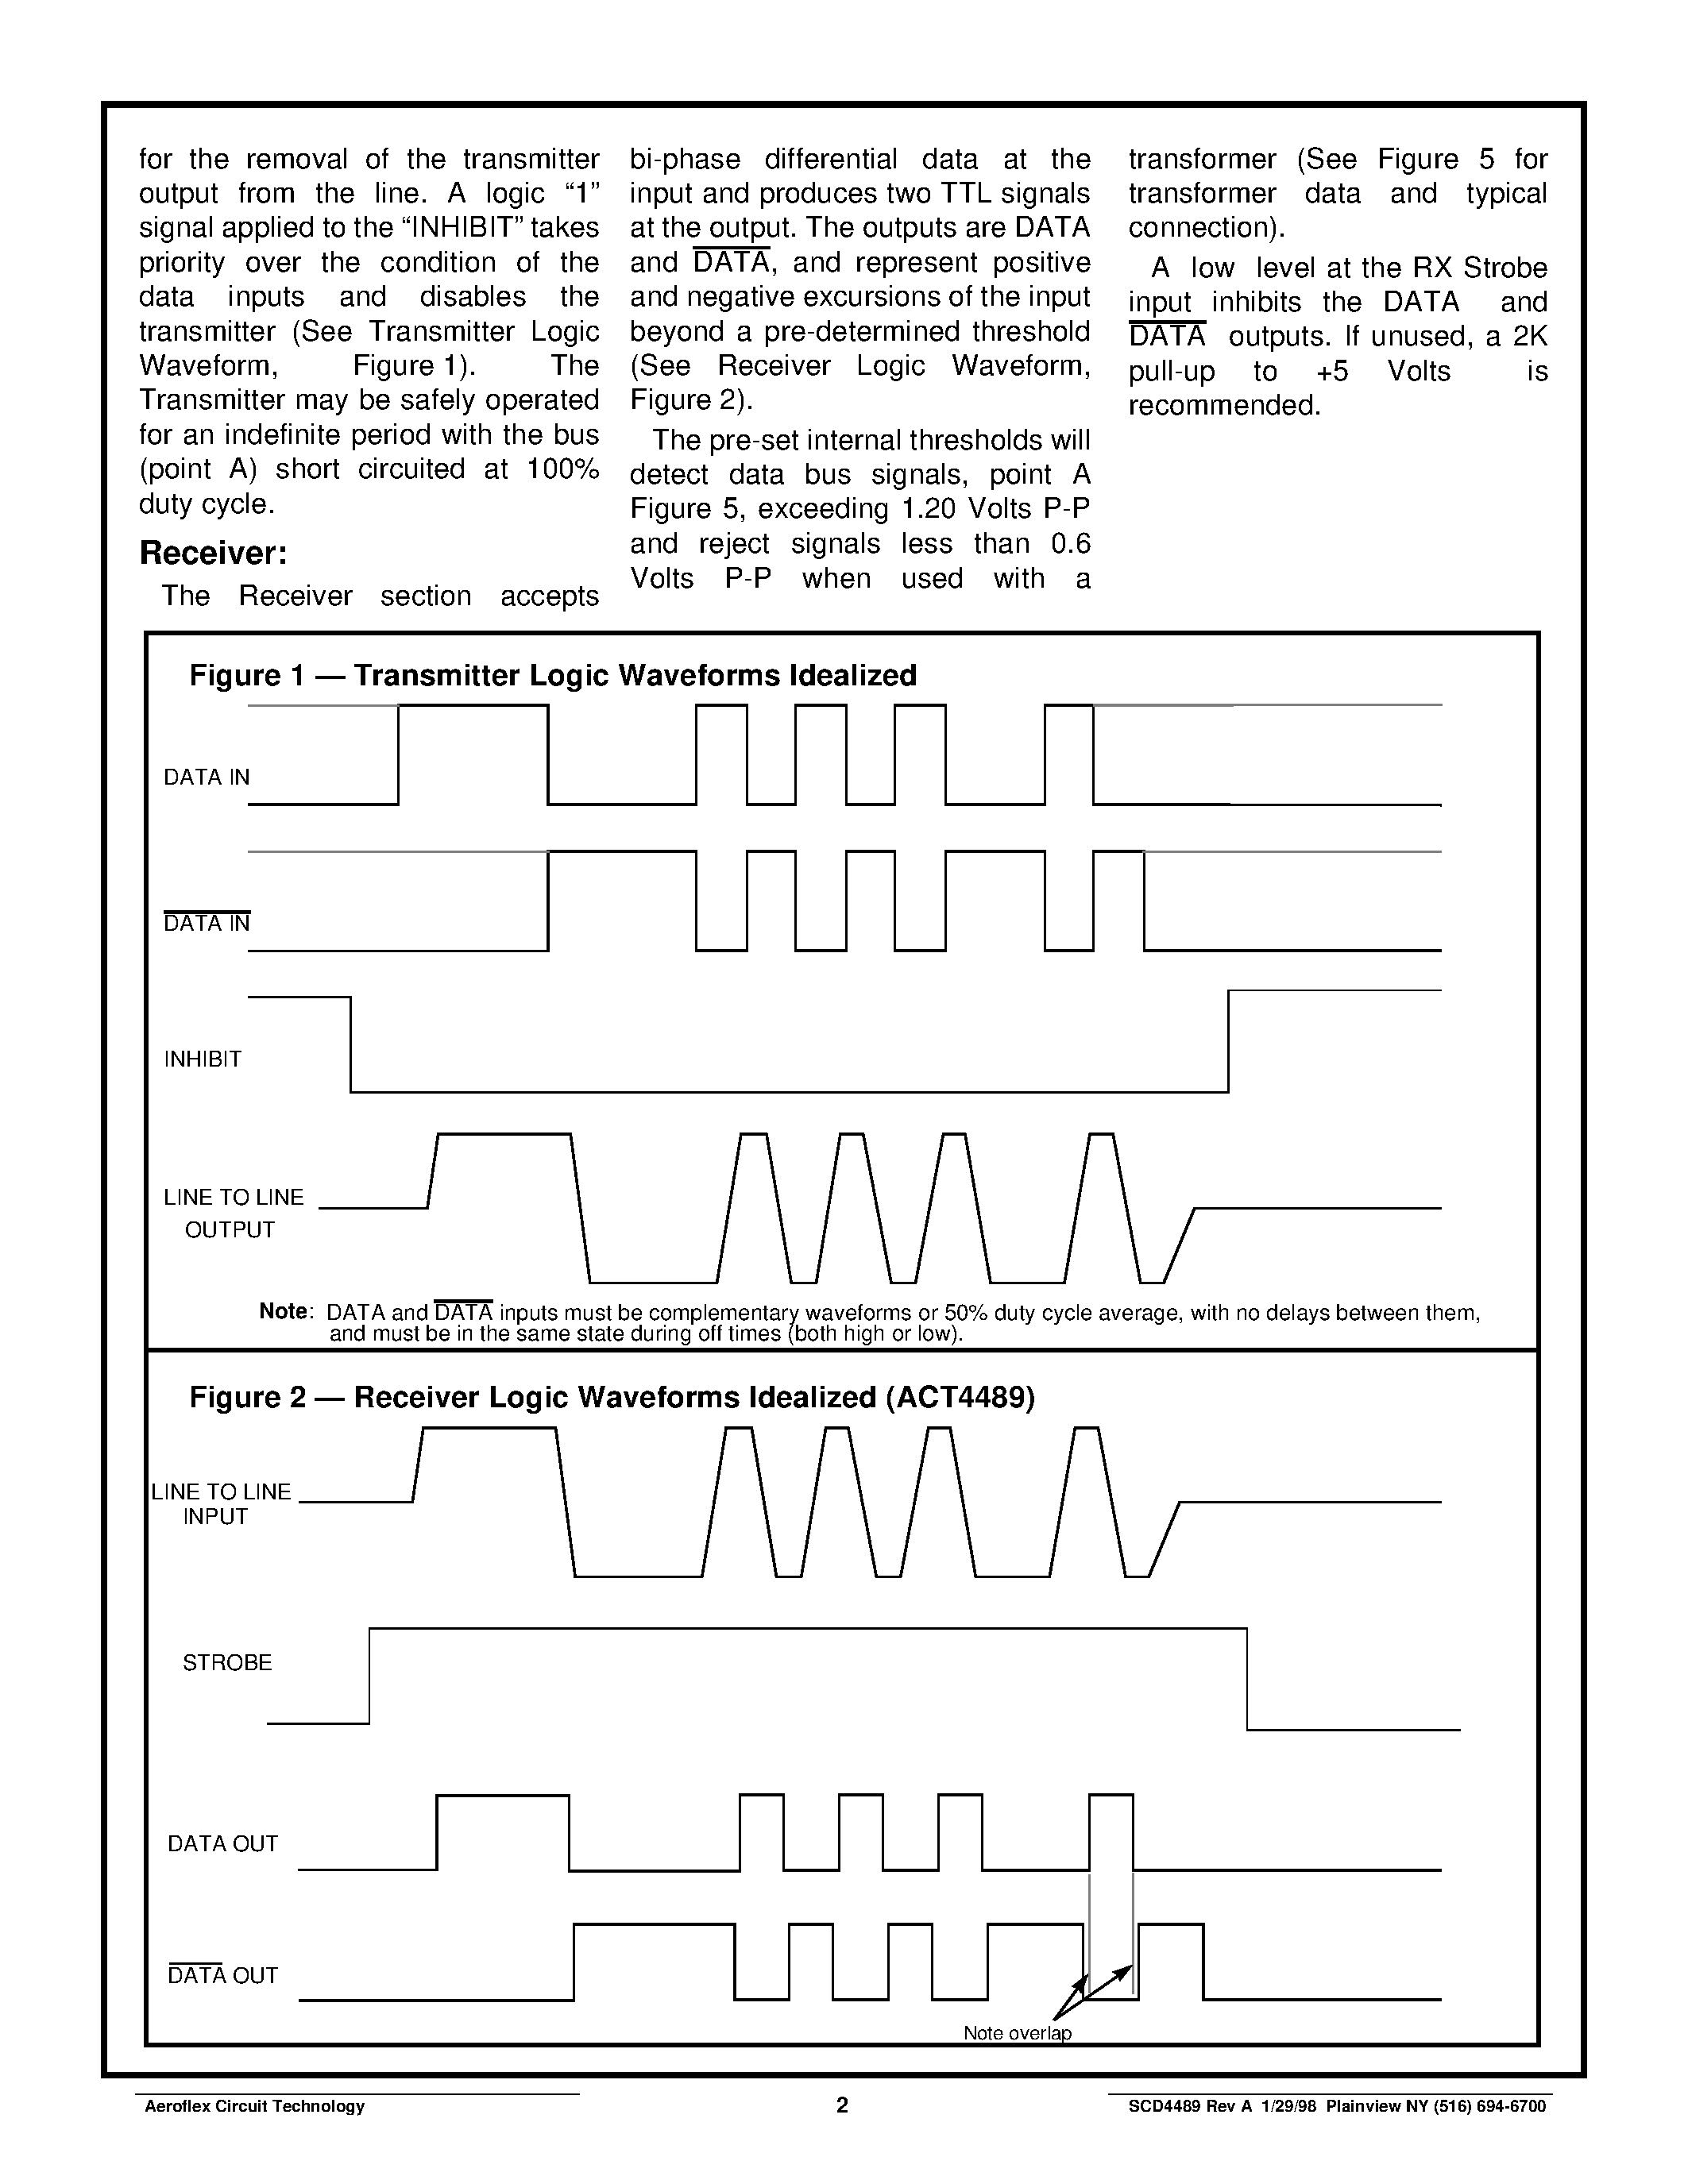 Datasheet ACT4489-FI - ACT 4489 SINGLE TRANSCEIVER FOR MIL-STD-1553/1760 page 2